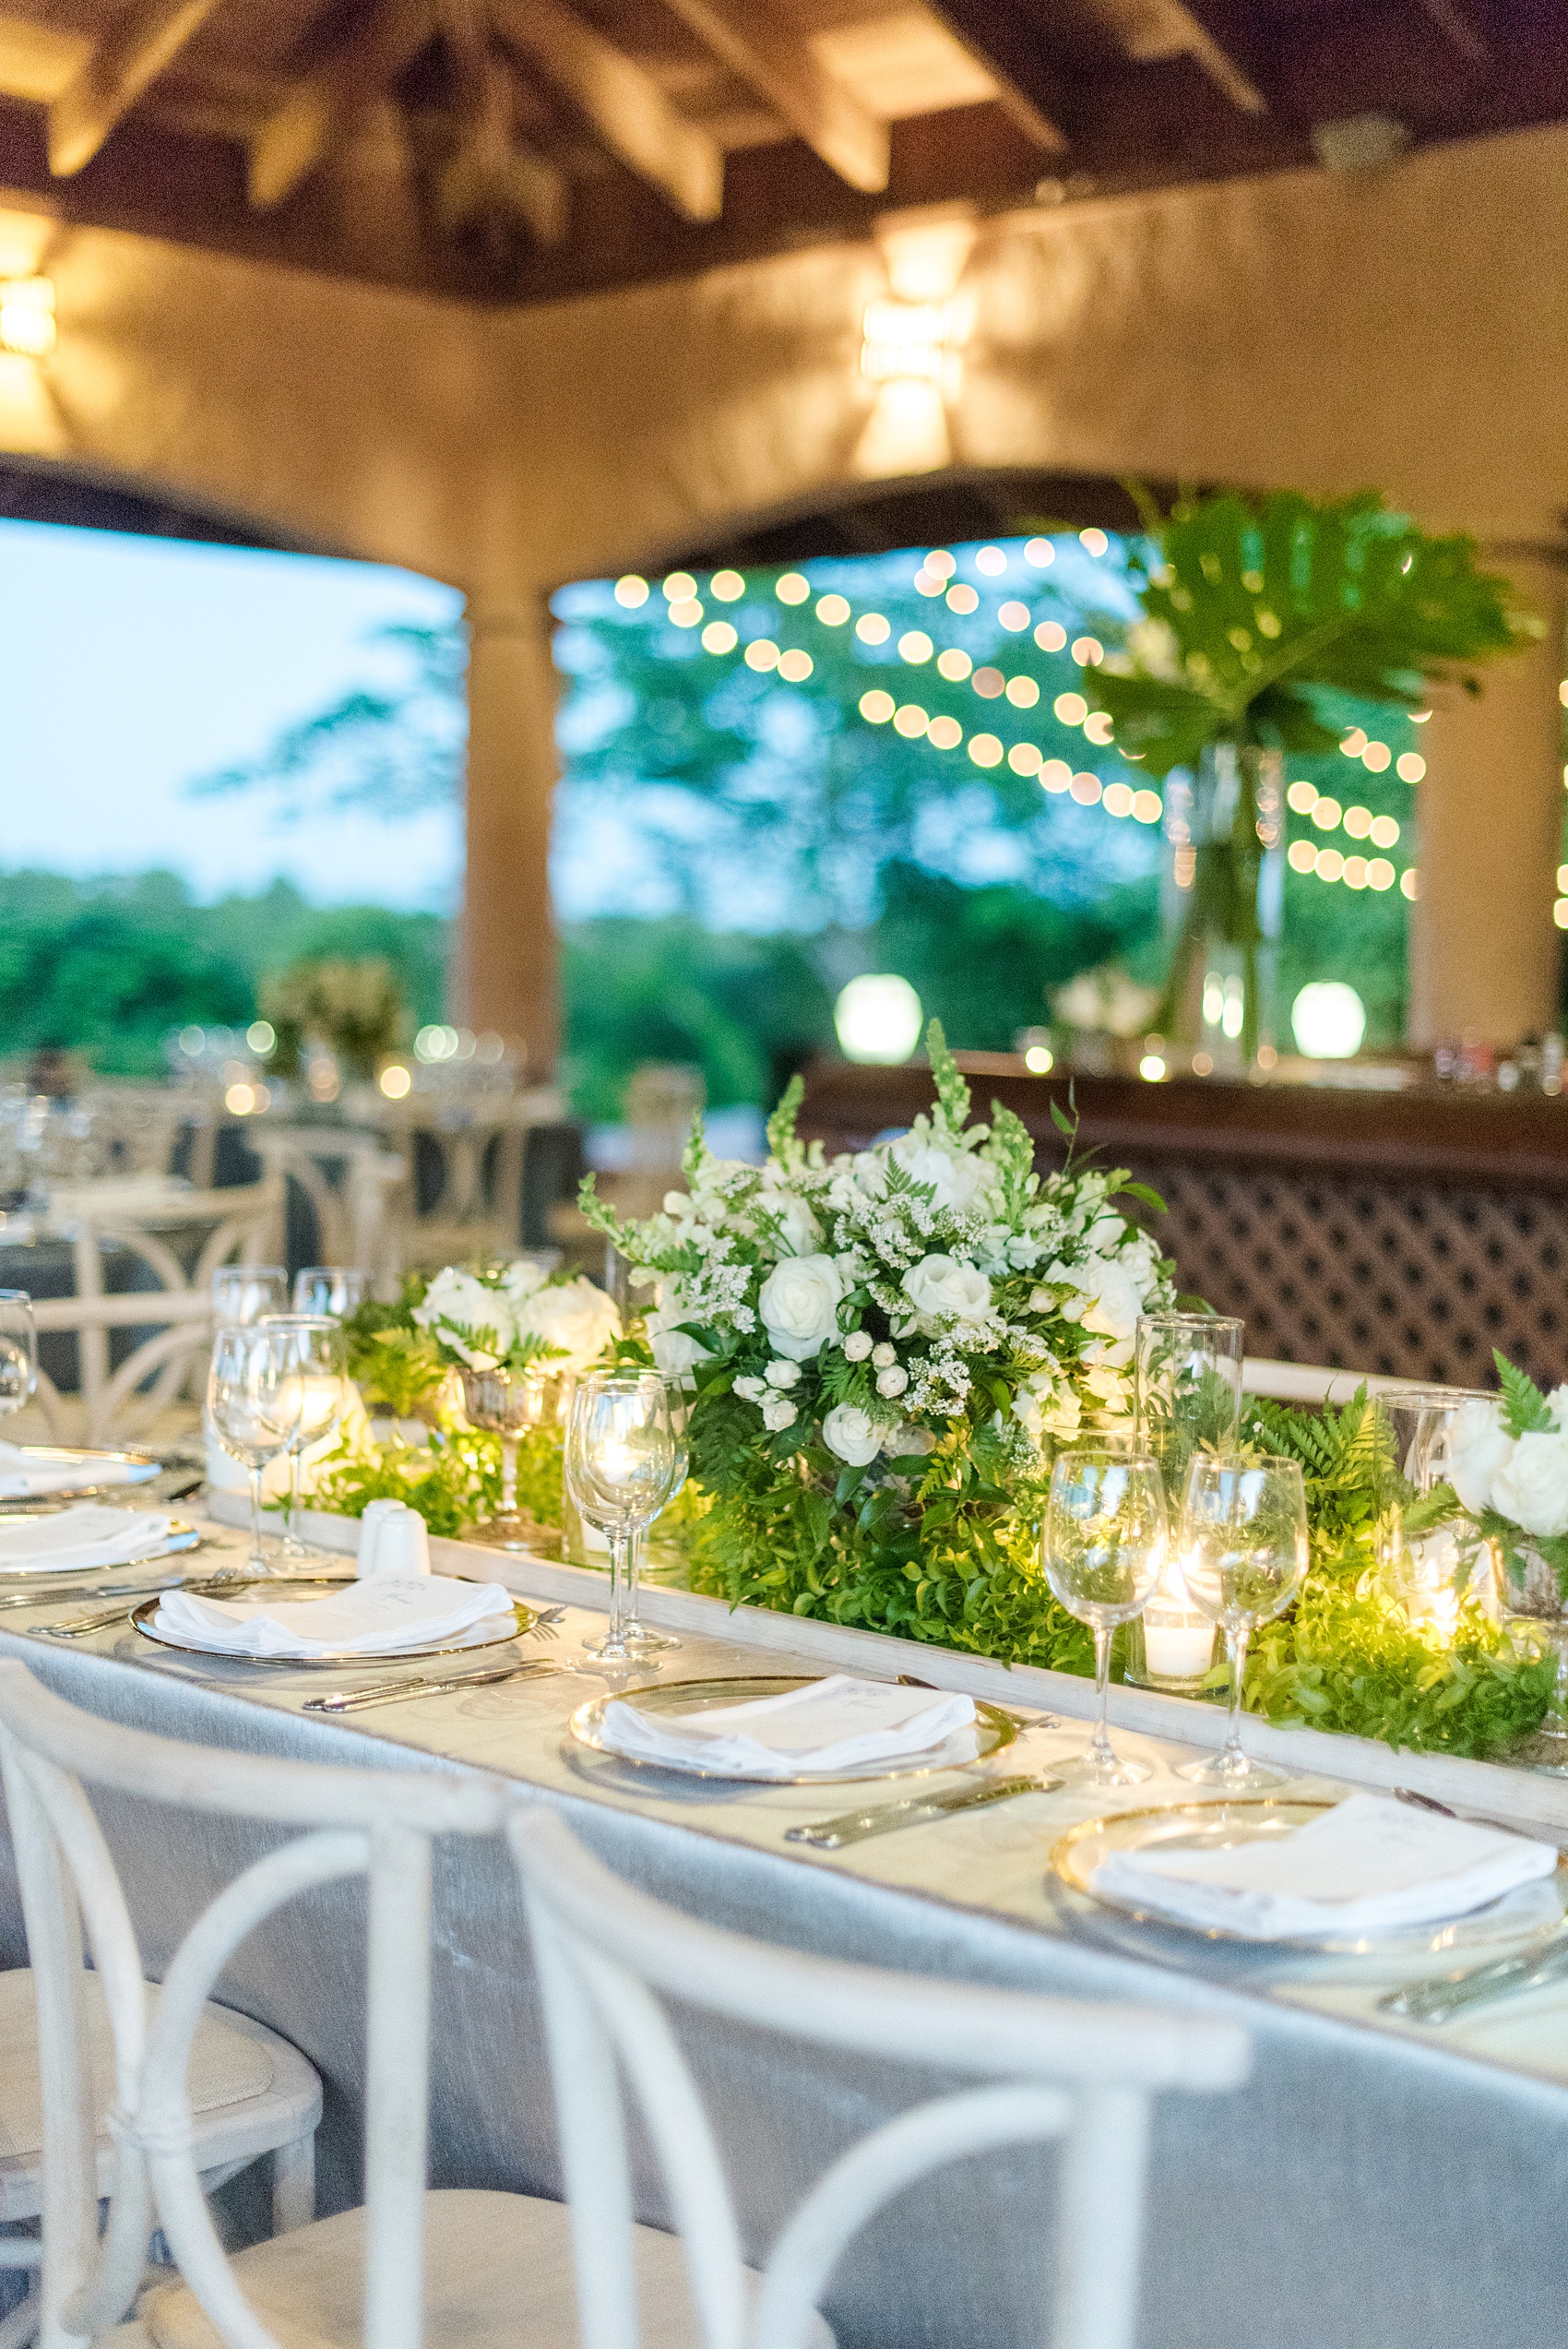 Casa de Campo in the Dominican Republic is a great location for a destination wedding. It’s in La Romana, an hour from Punta Cana, and is an all inclusive resort with Minitas beach and mountains view. It’s a beautiful venue, evidenced by these pictures by destination wedding photographer, Mikkel Paige Photography. Click through for more blue + white ceremony and reception ideas! Planning by @theeventeur. #mikkelpaige #bluewedding #dominicanrepublicwedidng #destinationweddingphotographer